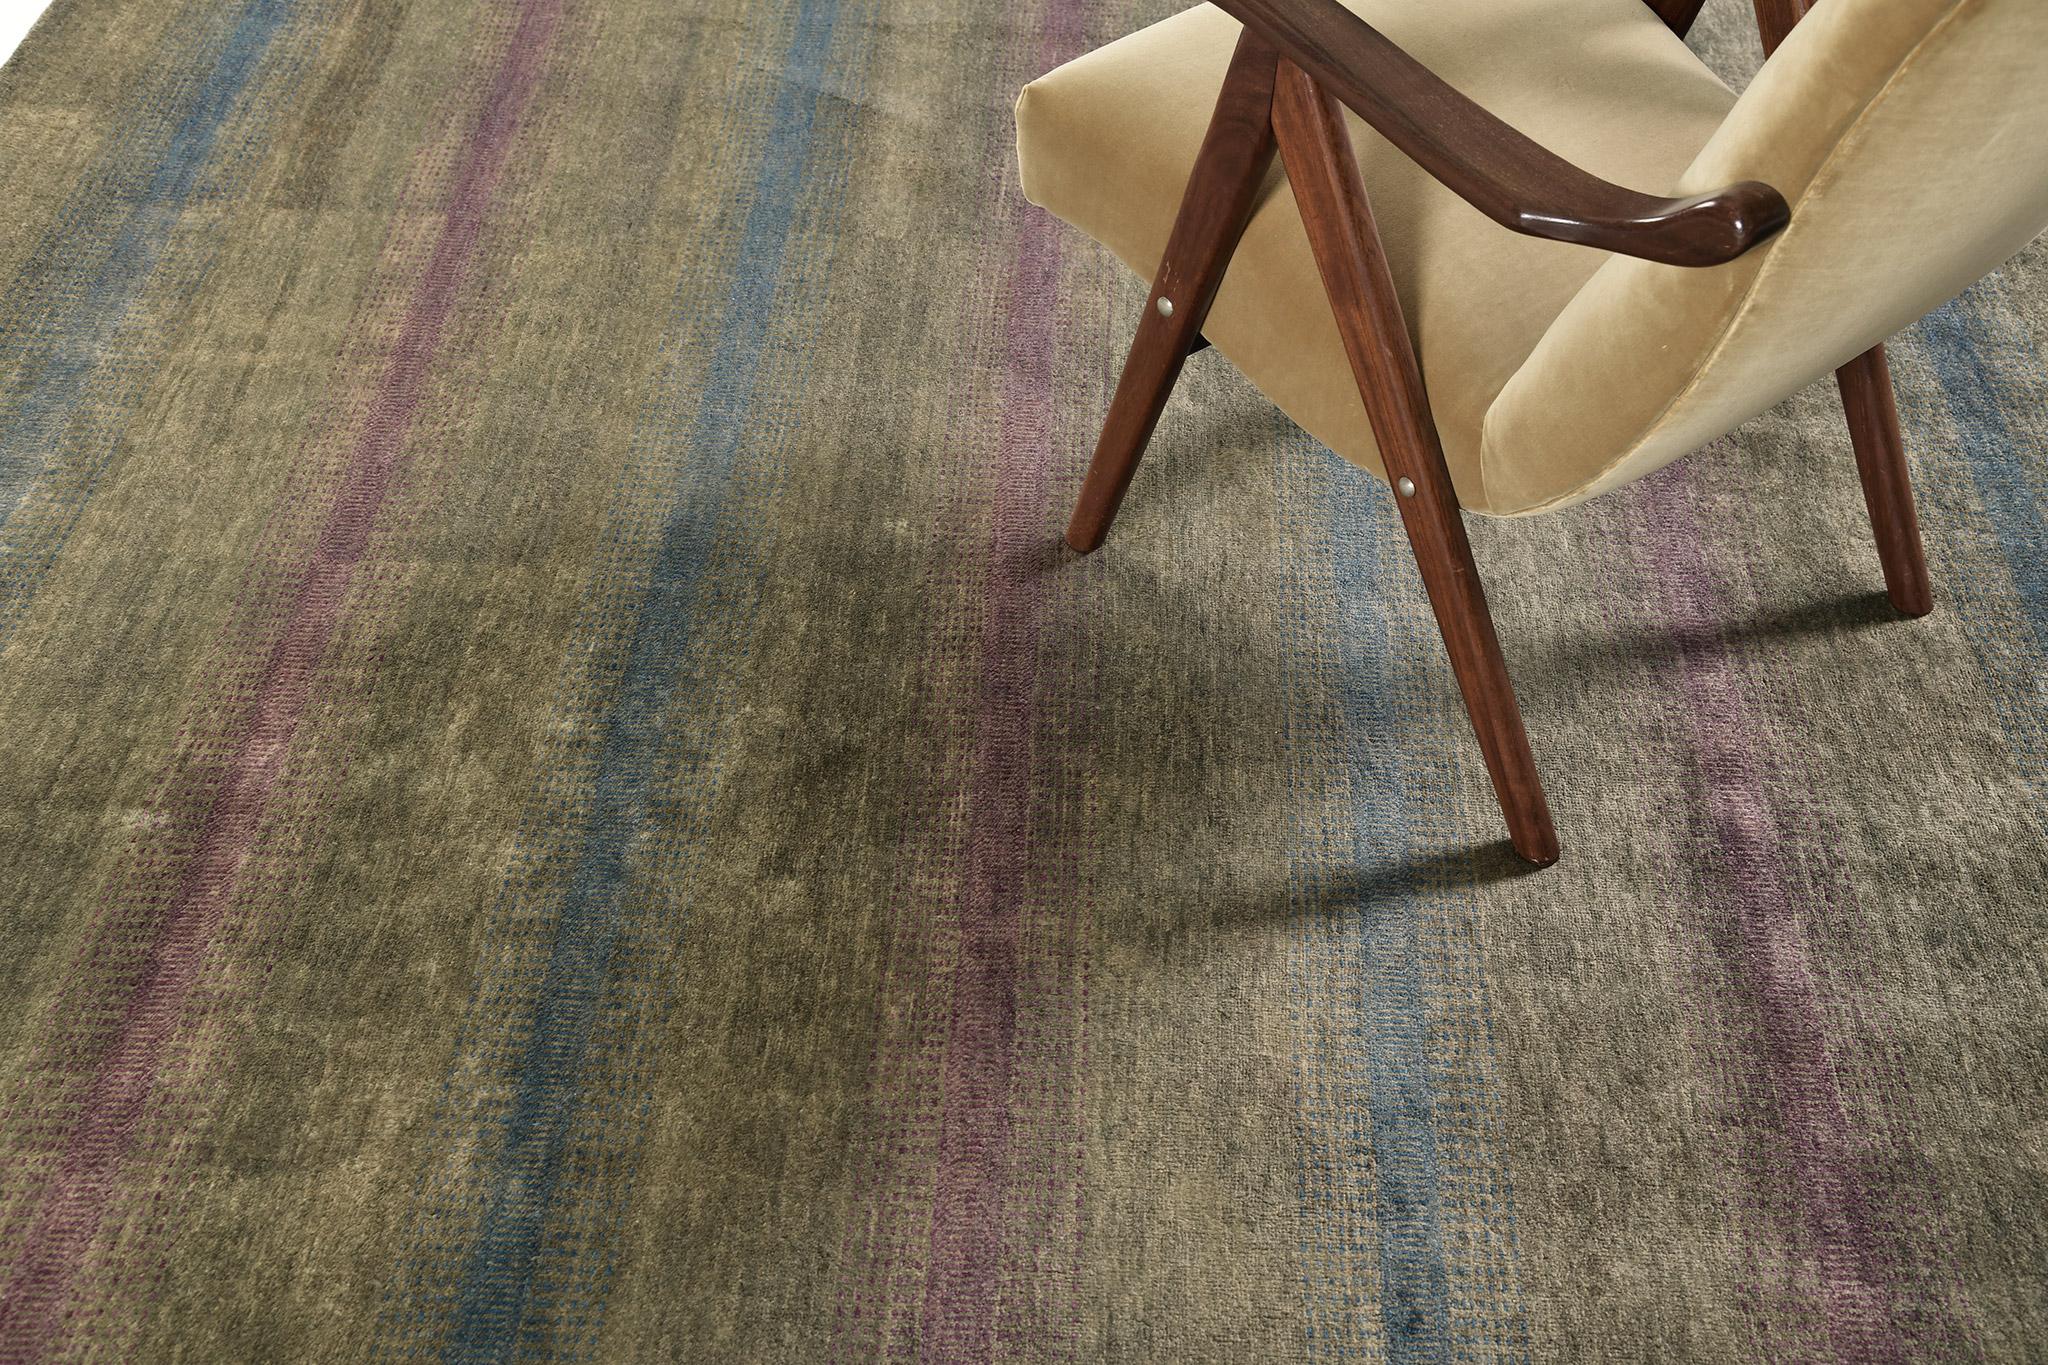 Noel is luxurious wool that features alternating red and blue lines over the gradient of variegated tones of olive and black. This rug is easy to harmonize with a variety of interiors. A timeless design that will be adored and treasured by the next